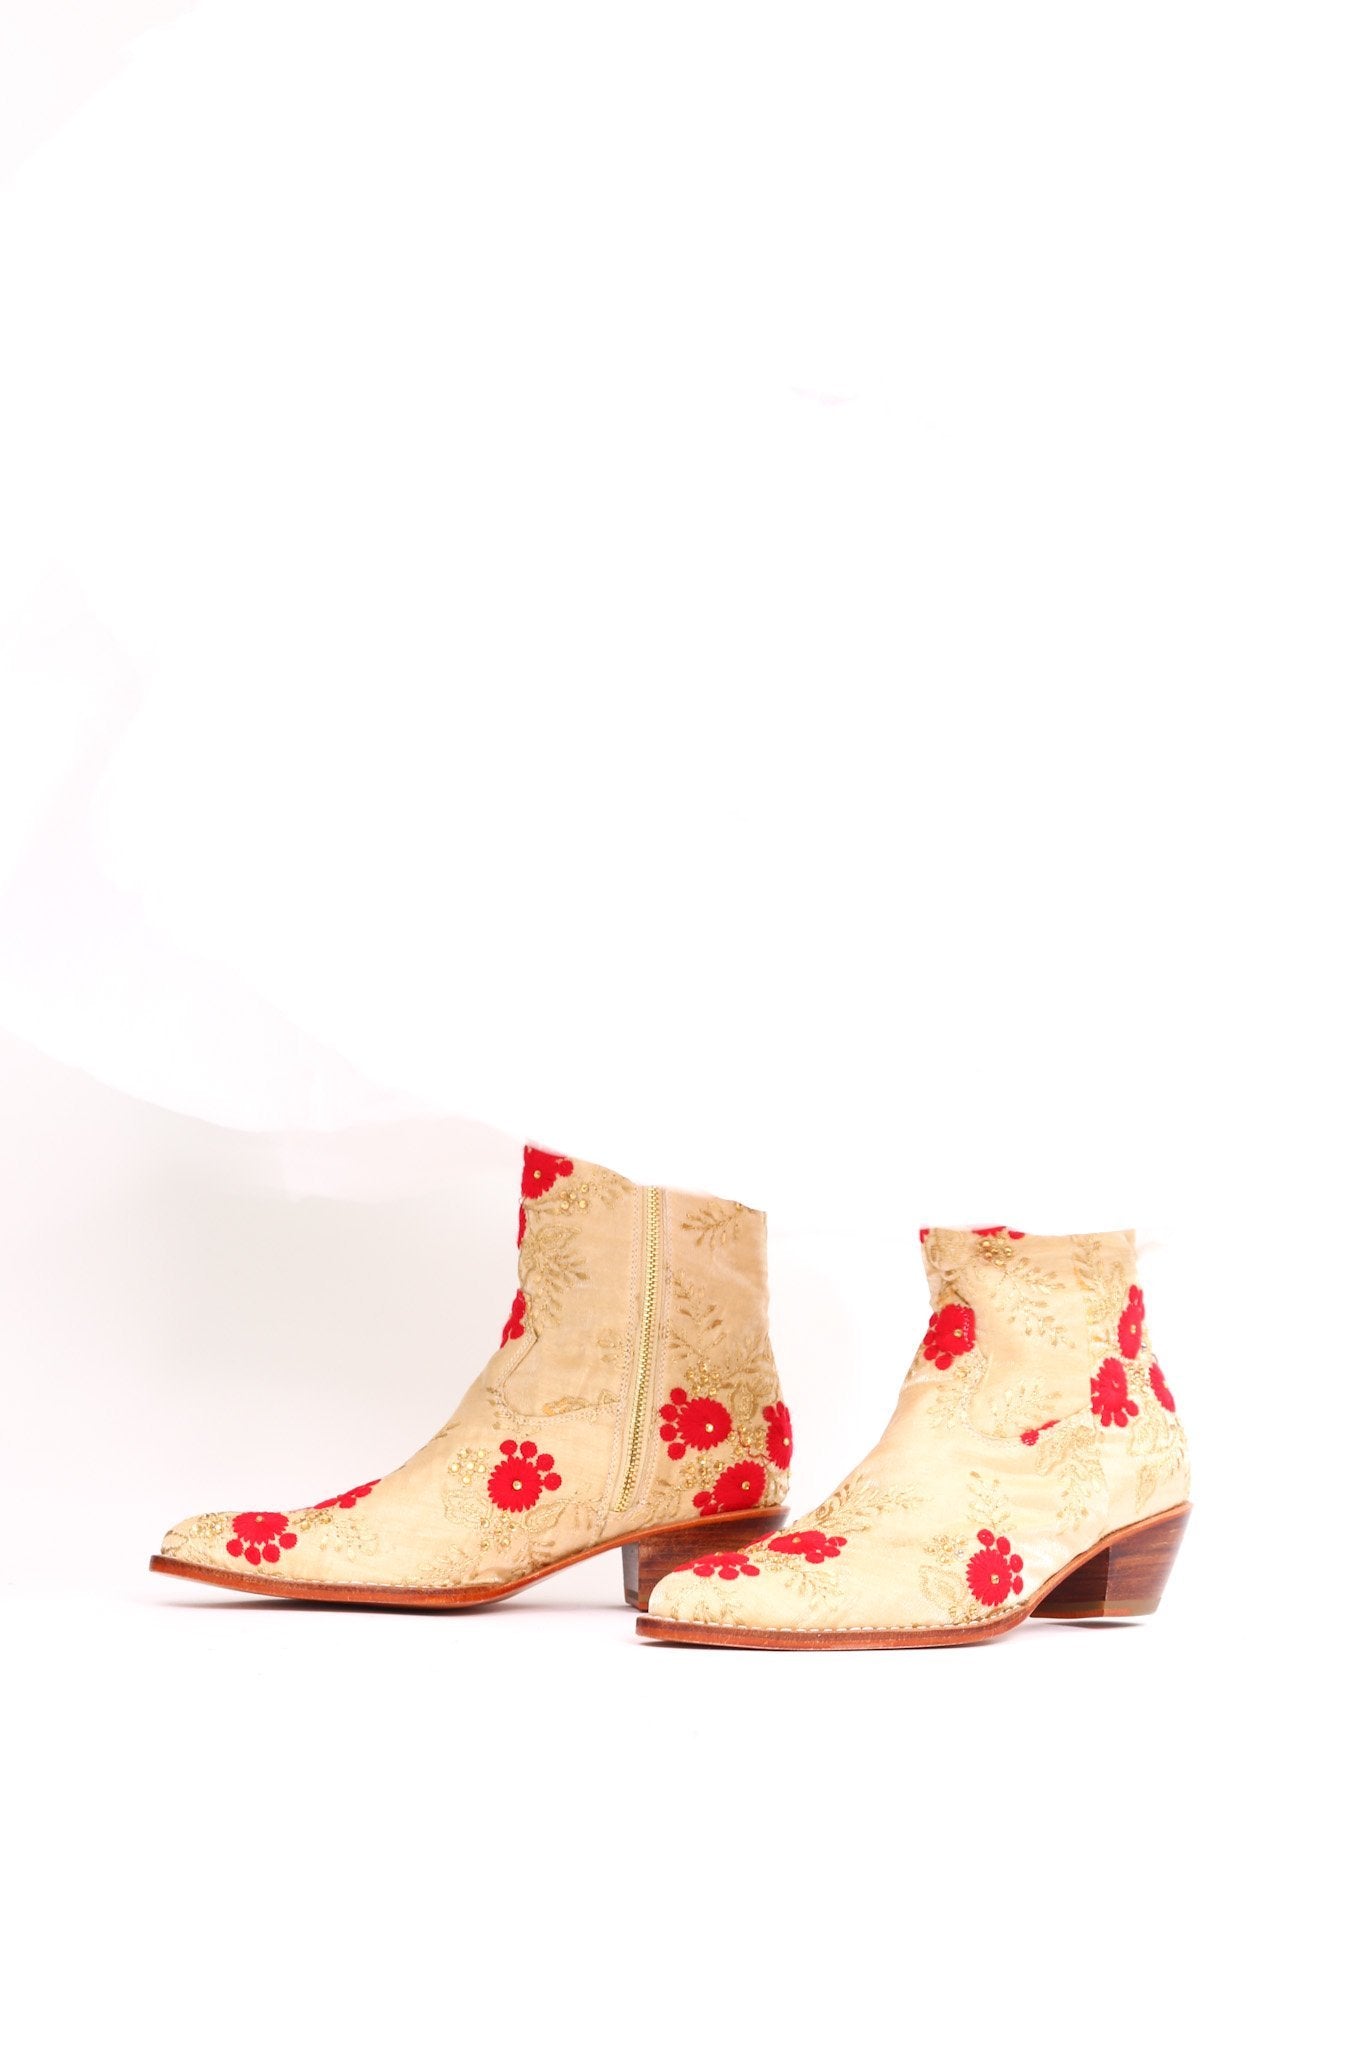 SILK EMBROIDERED BOOTS TENILLE MOMO NEW YORK